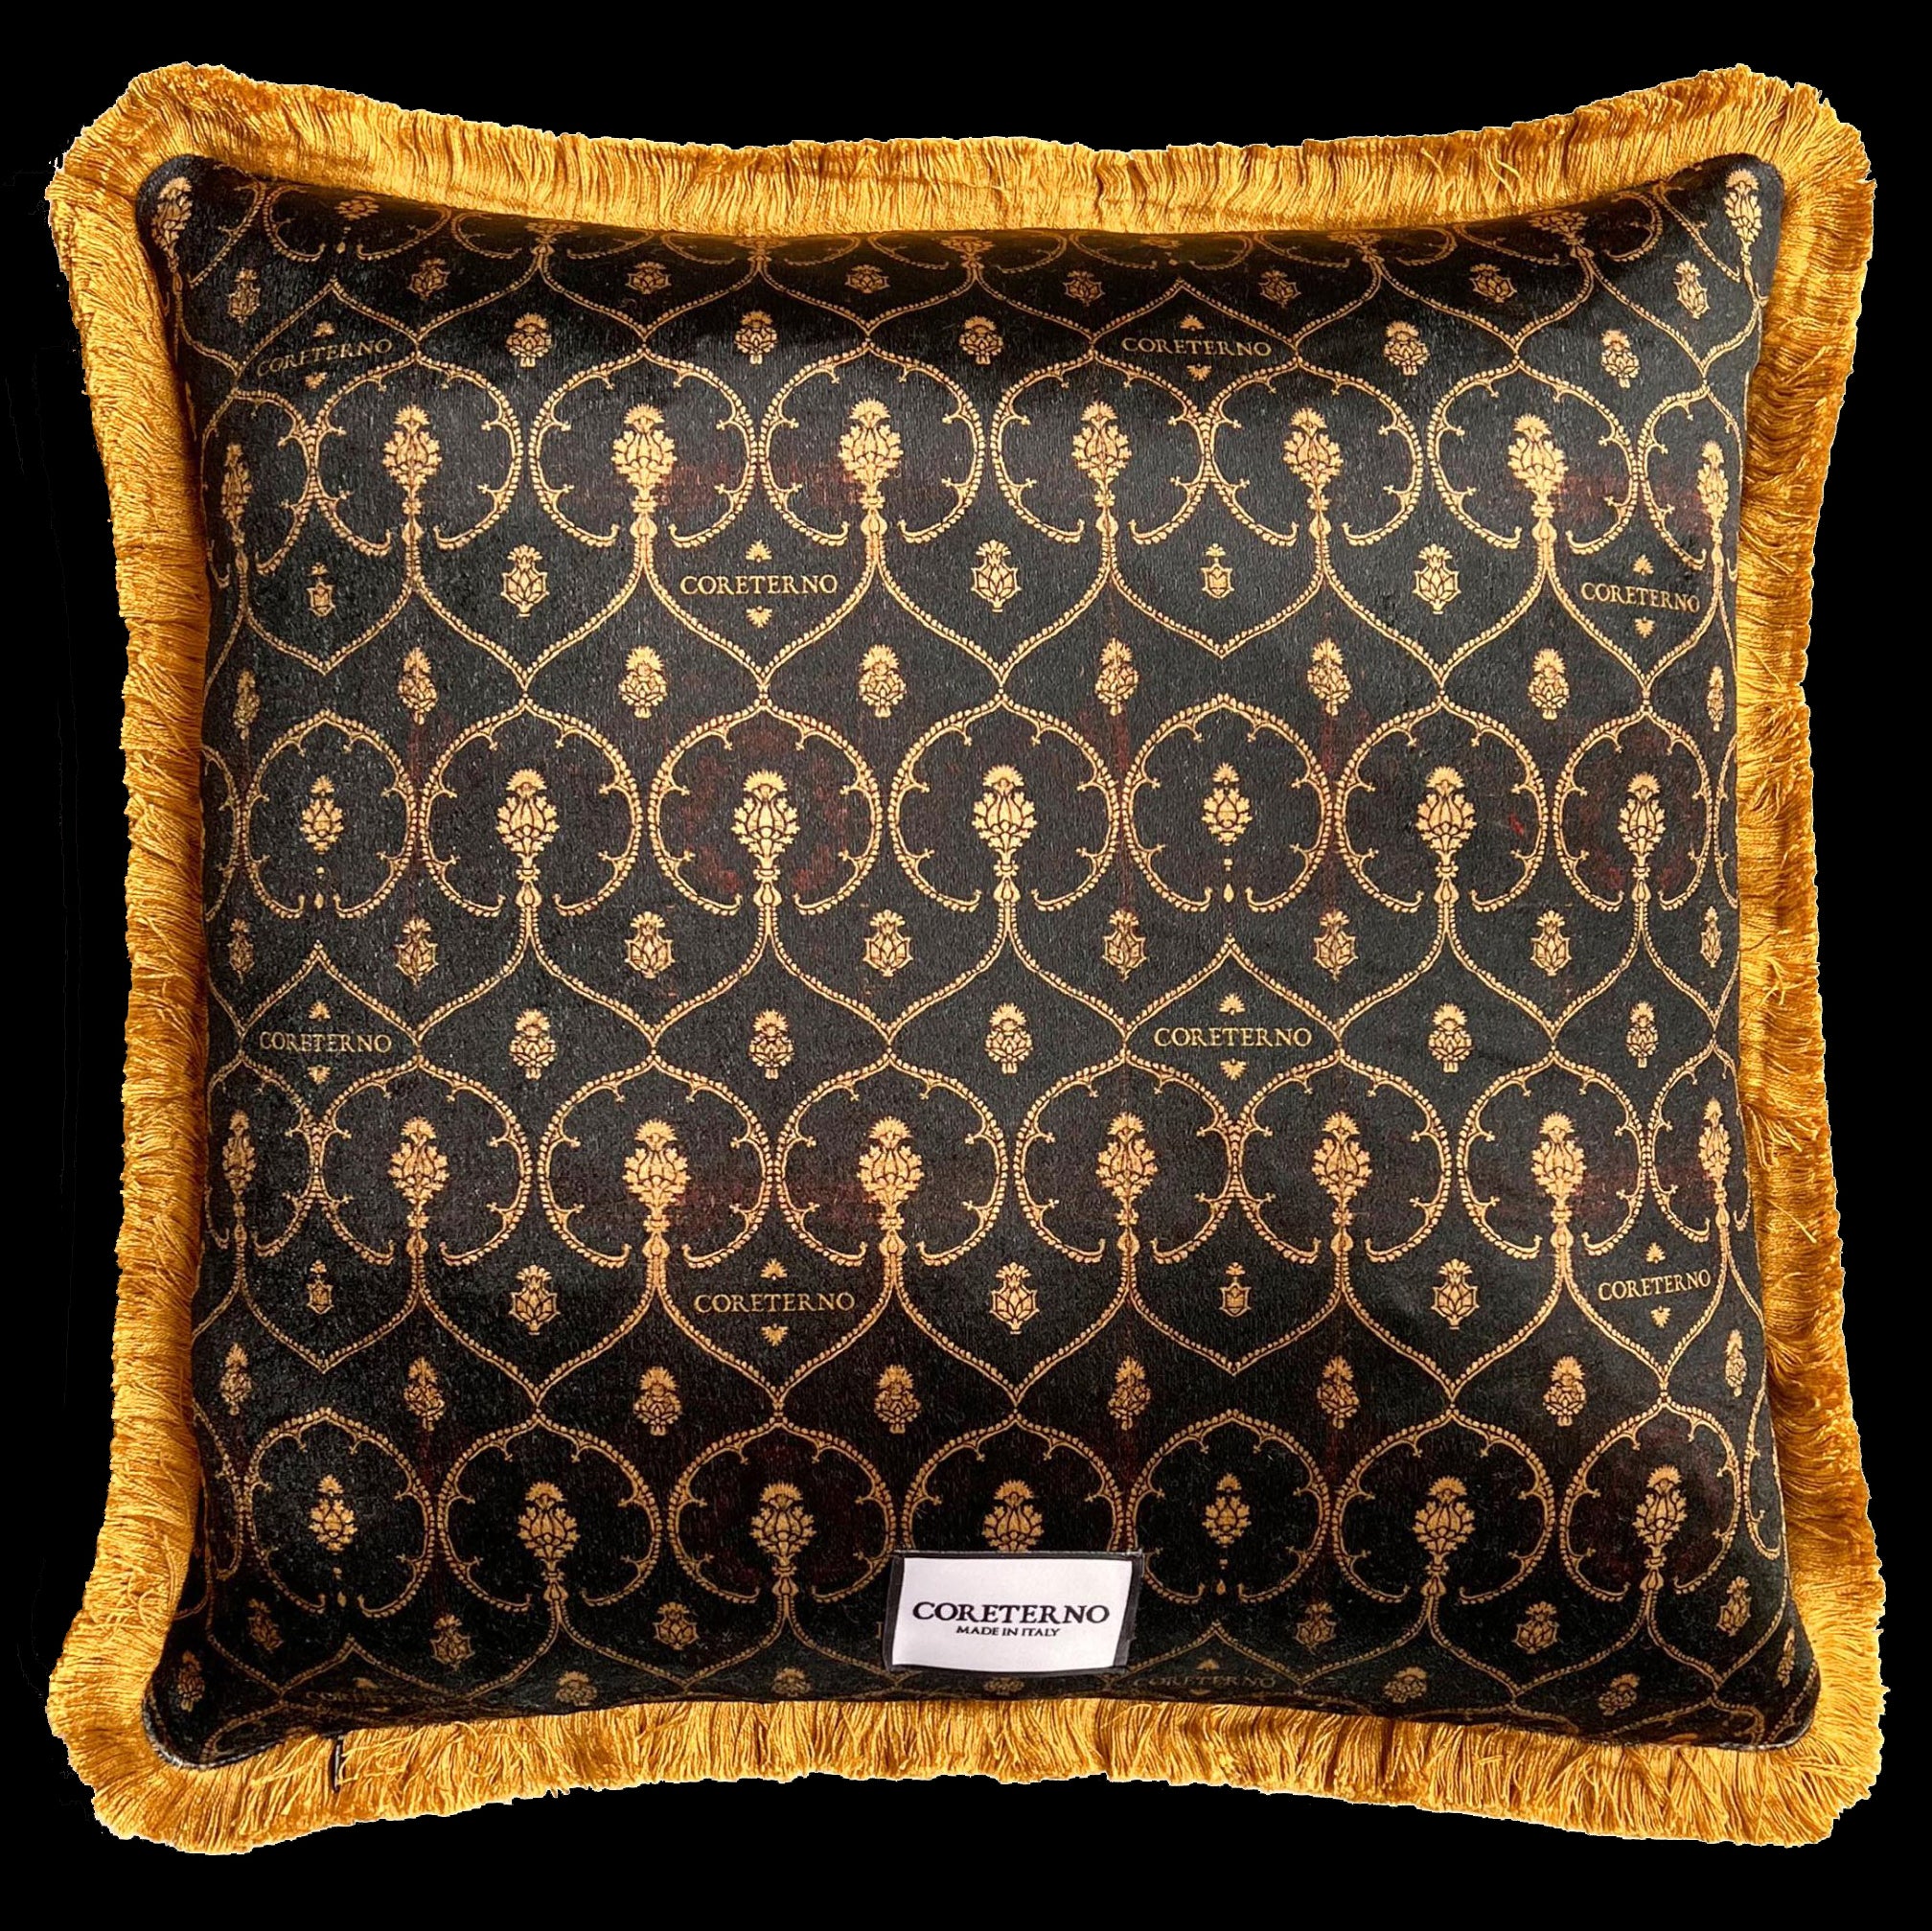 Back view of cushion with victorian inspired gold and black pattern